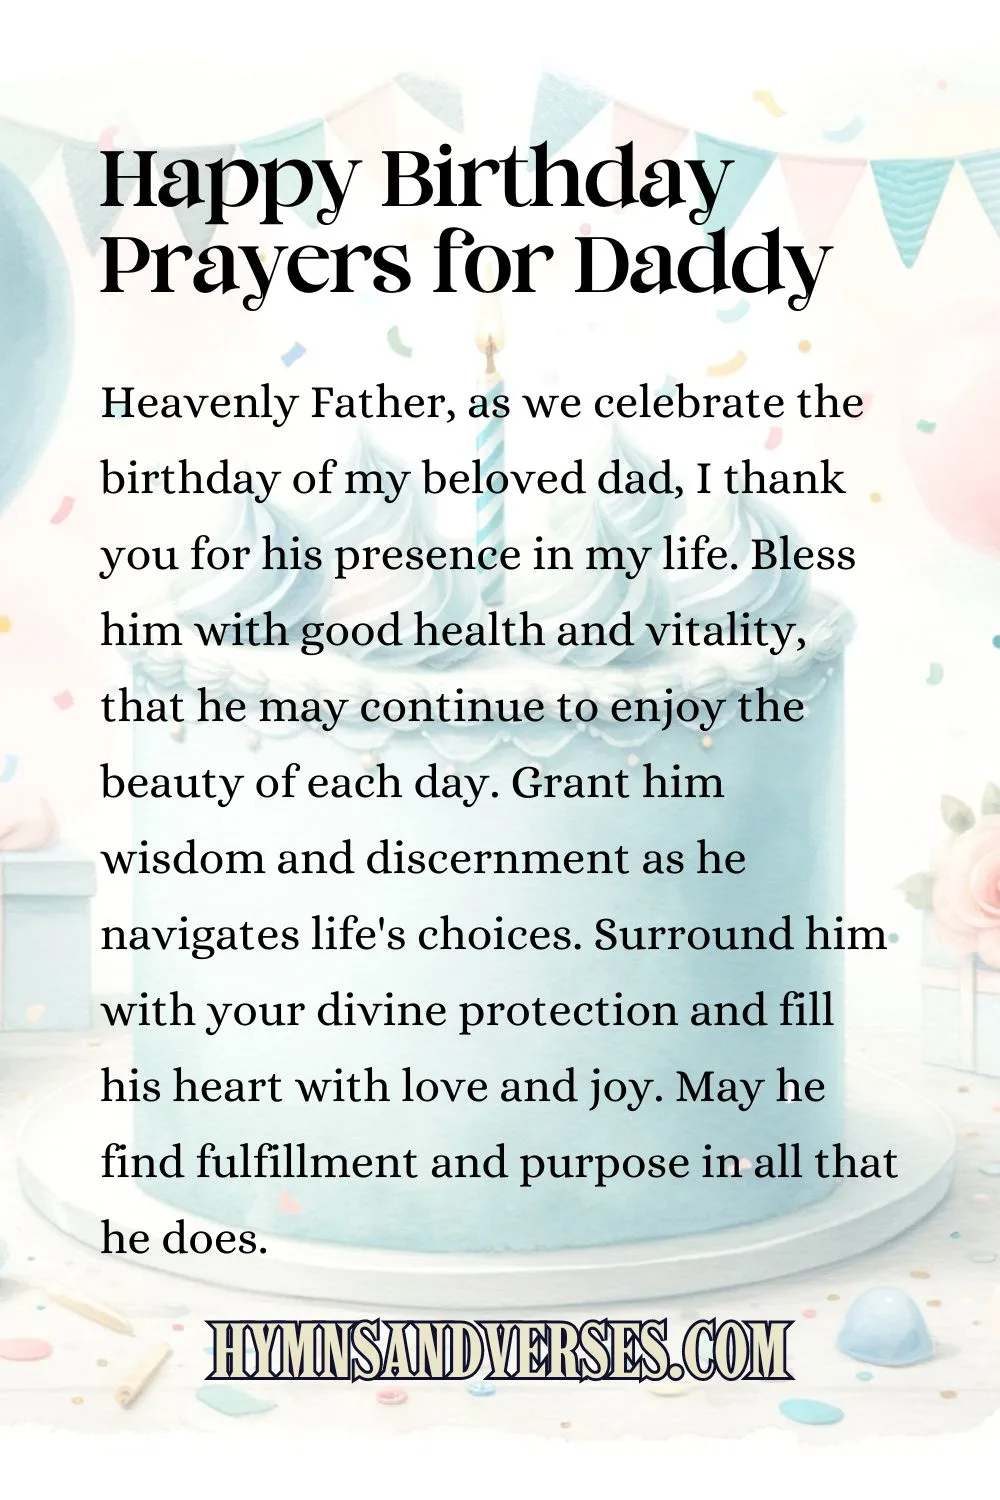 Happy birthday prayers for daddy, reads: Heavenly Father, as we celebrate the birthday of my beloved dad, I thank you for his presence in my life. Bless him with good health and vitality, that he may continue to enjoy the beauty of each day. Grant him wisdom and discernment as he navigates life's choices. Surround him with your divine protection and fill his heart with love and joy. May he find fulfillment and purpose in all that he does.